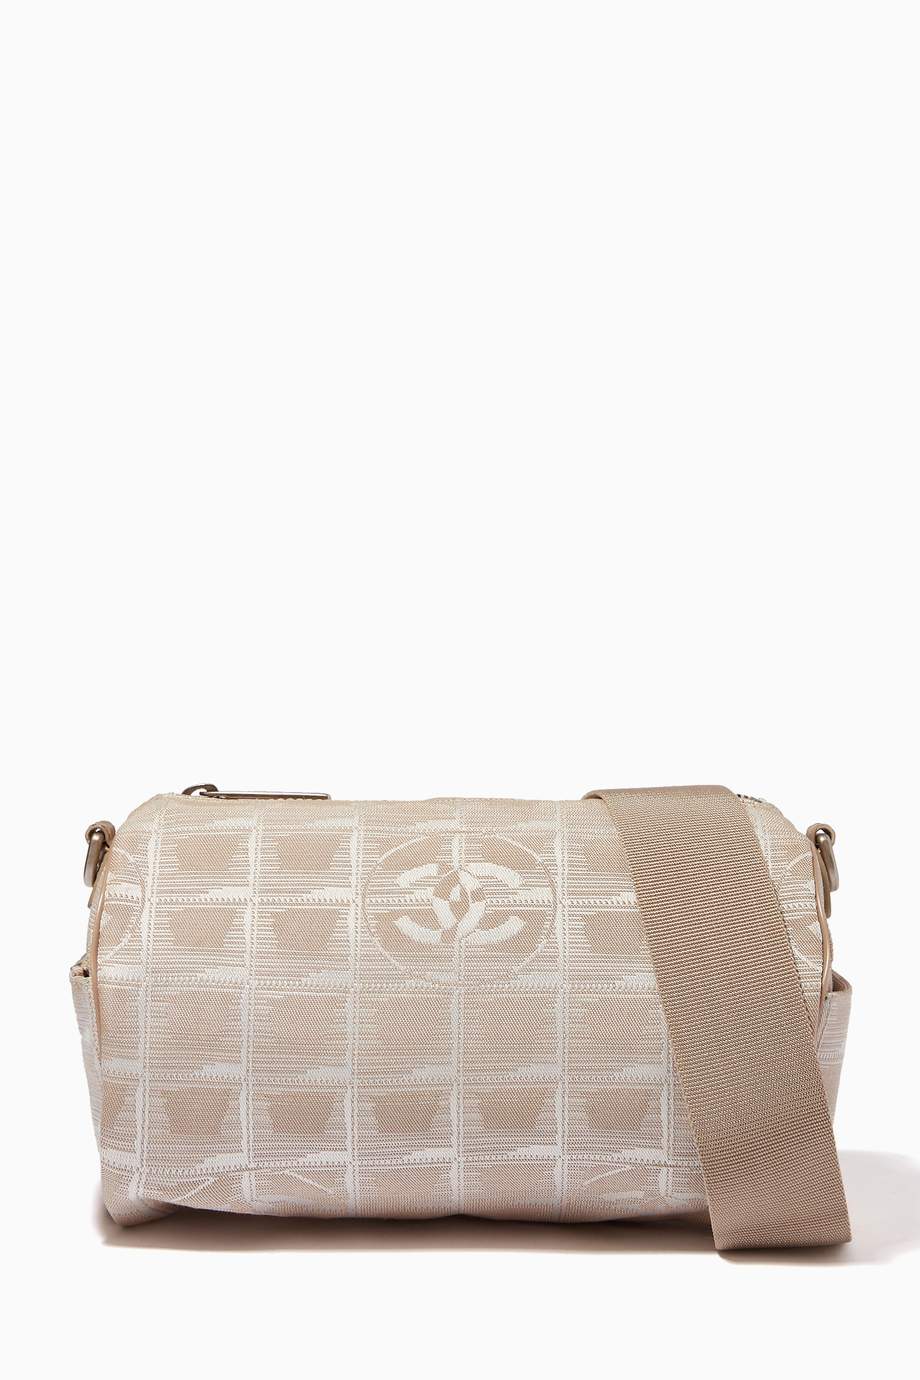 Shop Chanel Vintage Neutral Small CC Travel Line in Nylon for Women | Ounass UAE